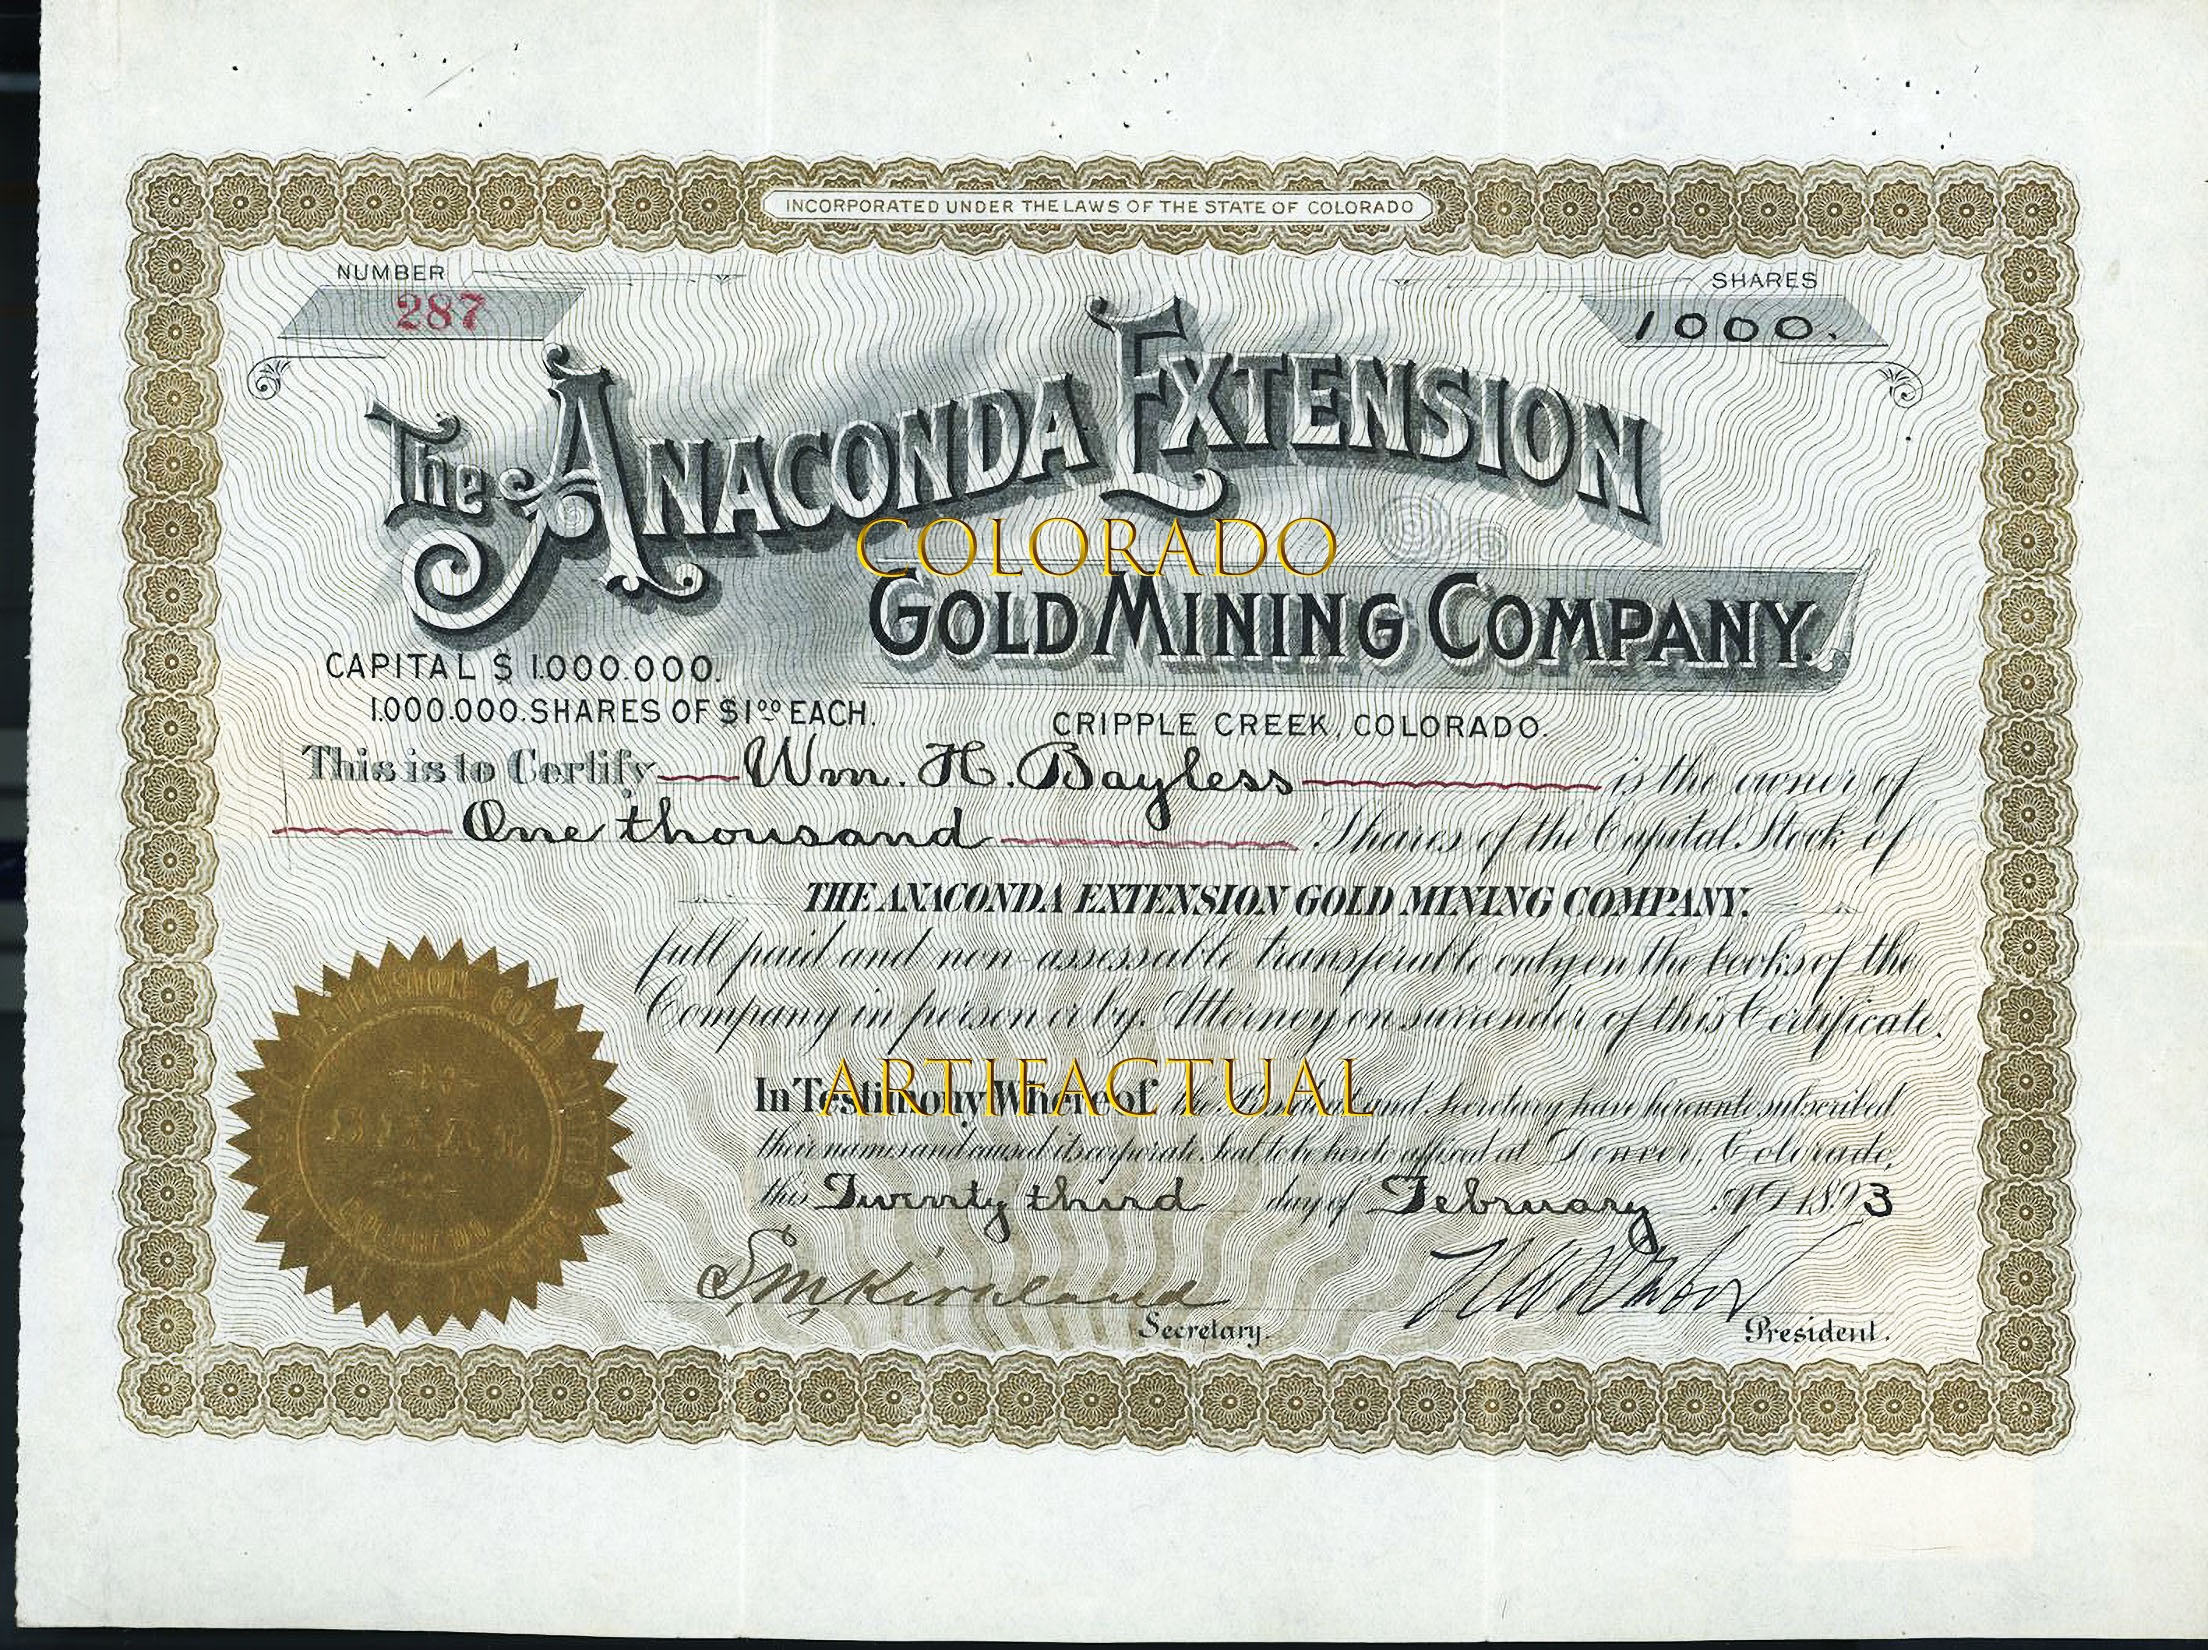 THE ANACONDA EXTENSION GOLD MINING COMPANY stock certificate Cripple Creek Colorado issued 1893 signed Horace A. W. Tabor